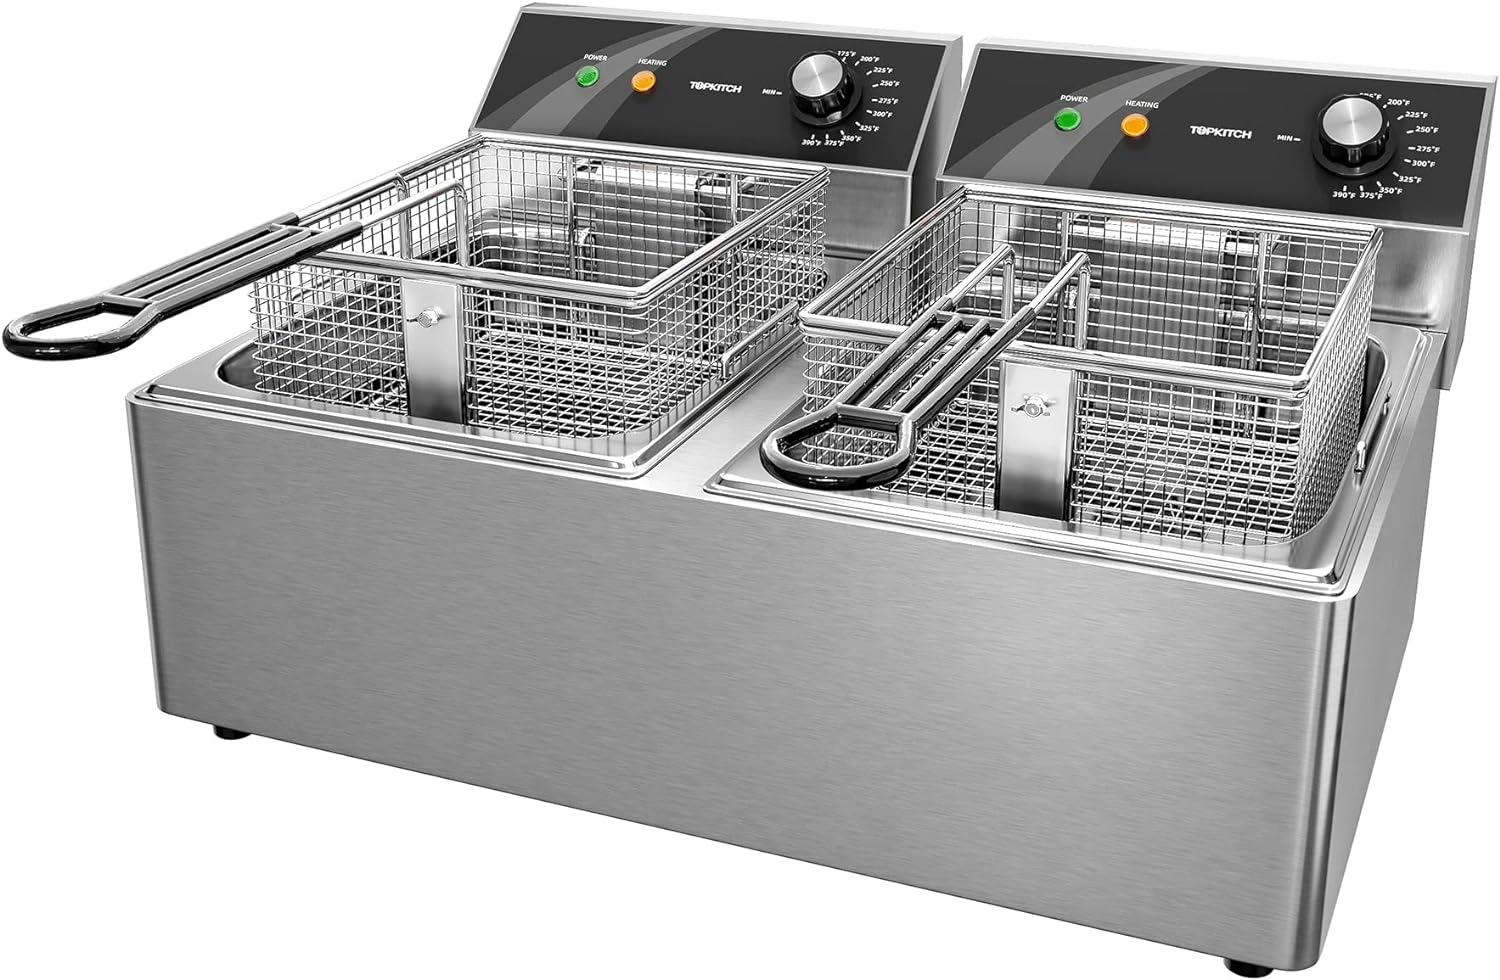 TOPKITCH Commercial Deep Fryer Stainless Steel Dual Tank with 2 Baskets